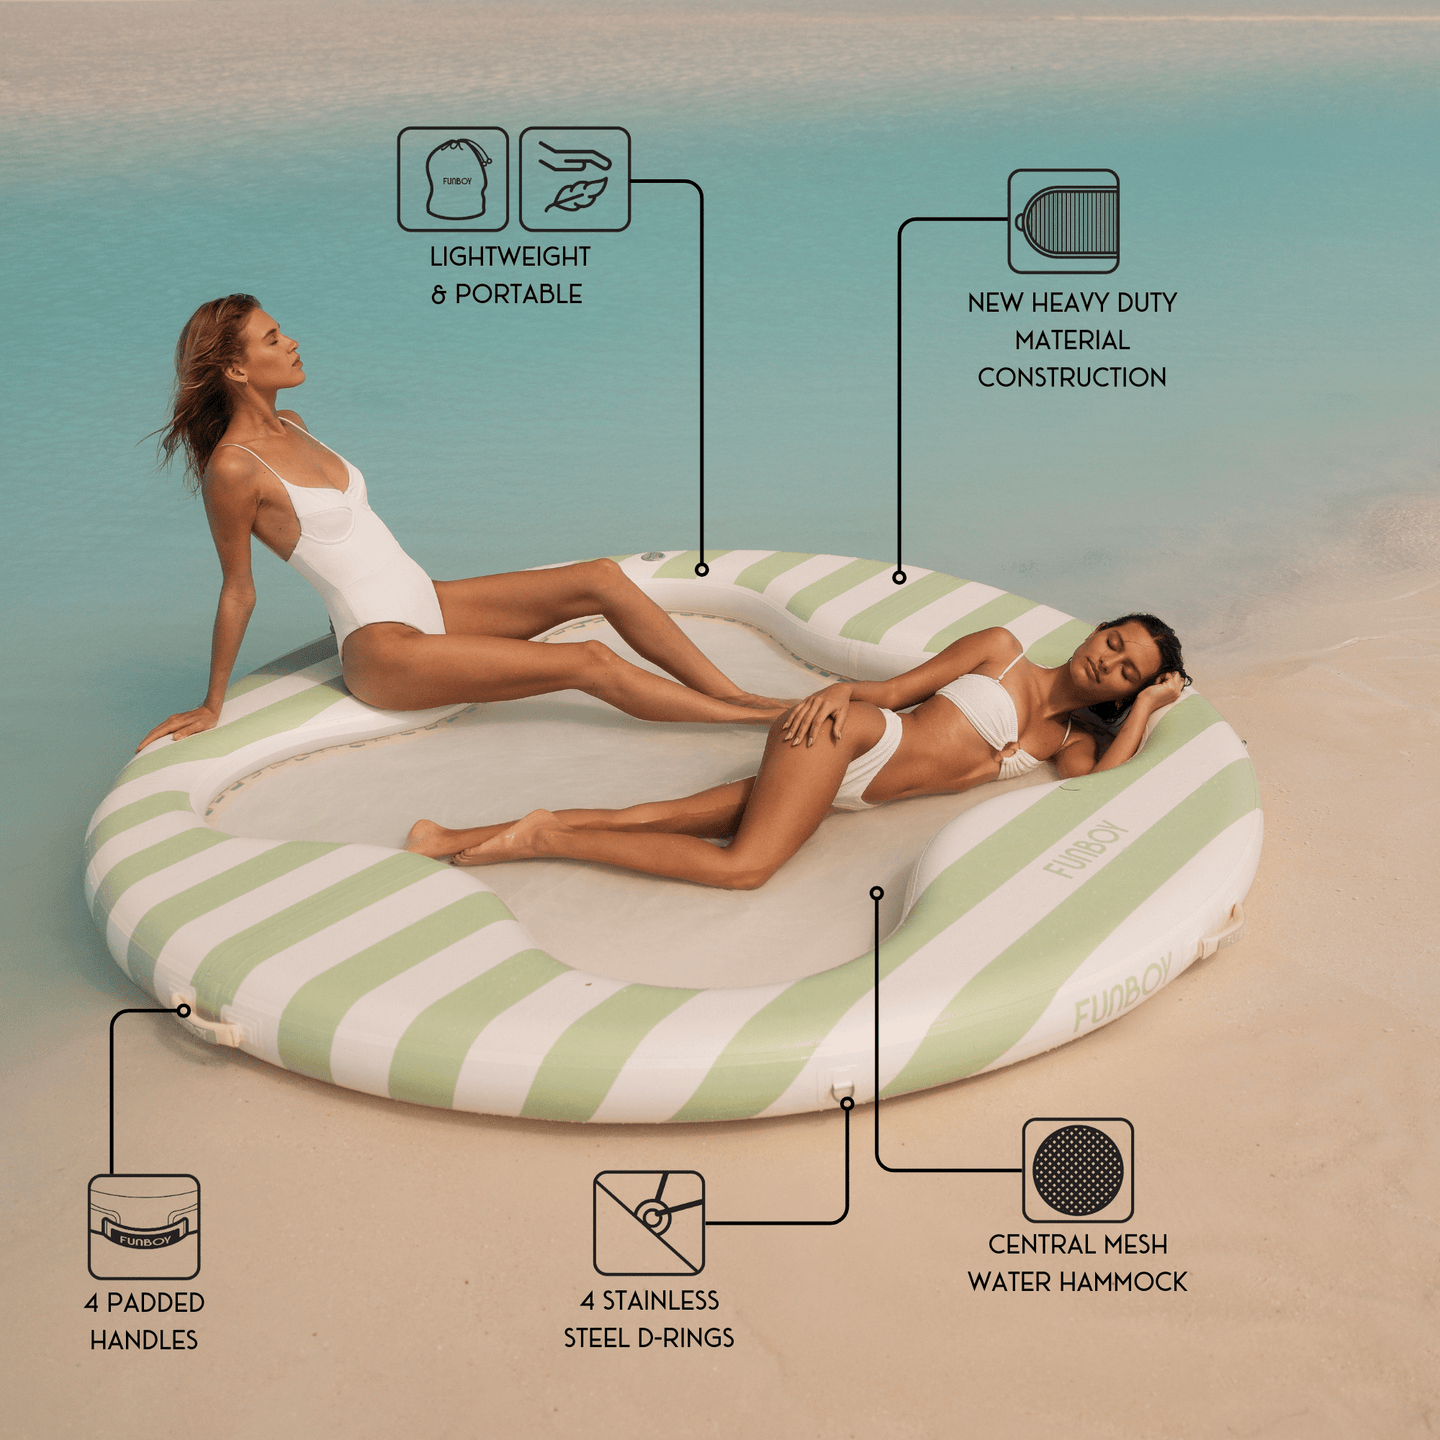 Swim Platform wtih water hammock. Lightweight and portable. New Heavy duty material construction. 4 padded handles. 4 stainless stell d-rings. Central Mesh Water Hammock. 